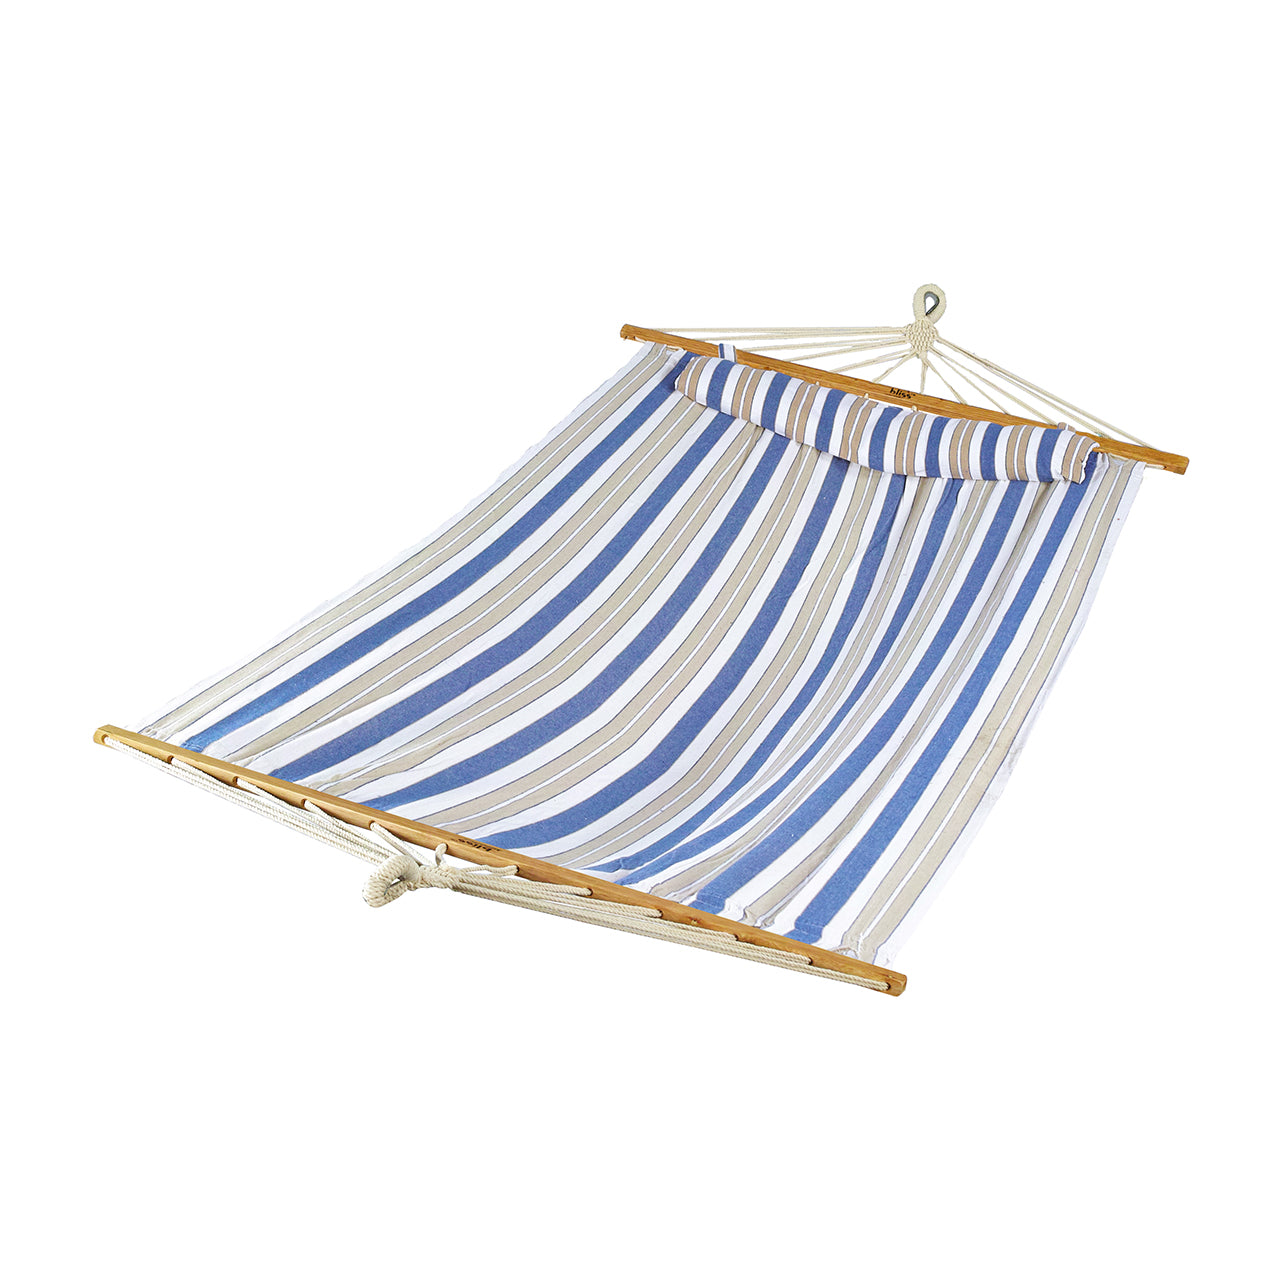 Bliss Hammocks 48-inch Wide Caribbean Hammock with Pillow, Velcro Straps, and Chains in the nautical stripe variation.